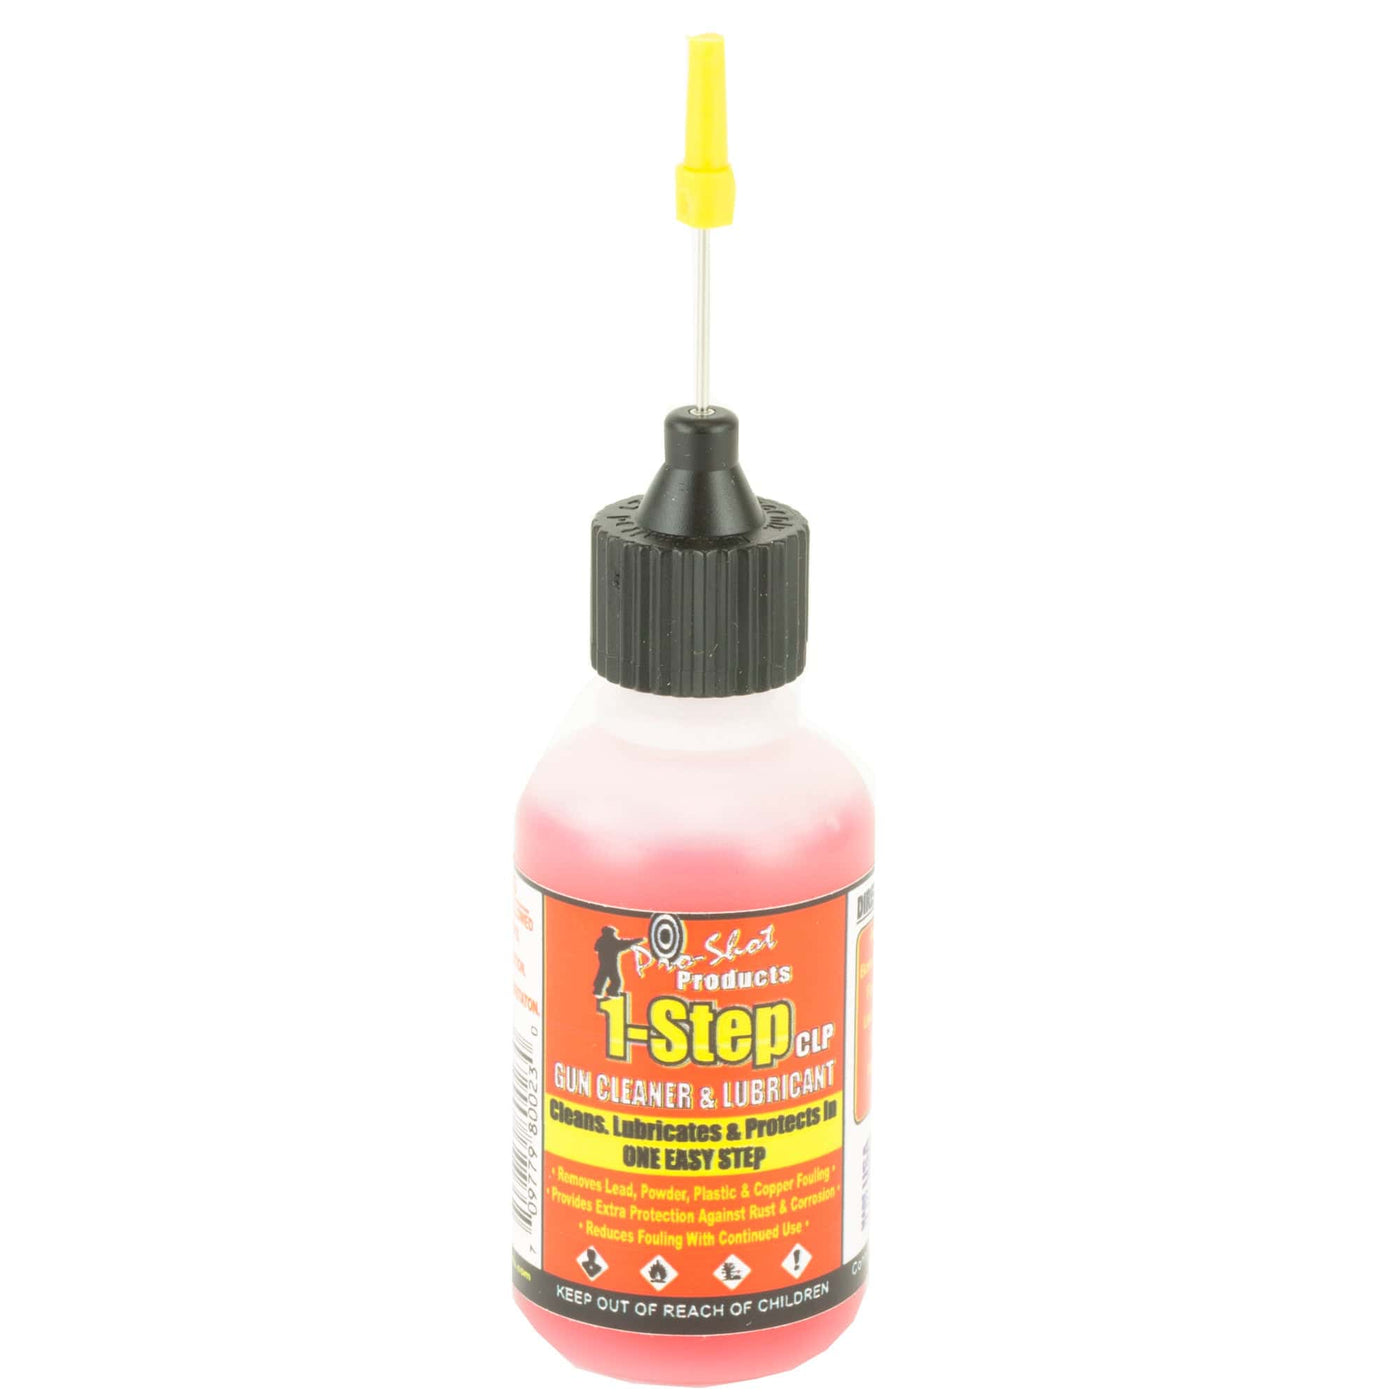 Pro-Shot Products Pro-shot 1 Step Needle Oiler 1oz Cleaning Equipment